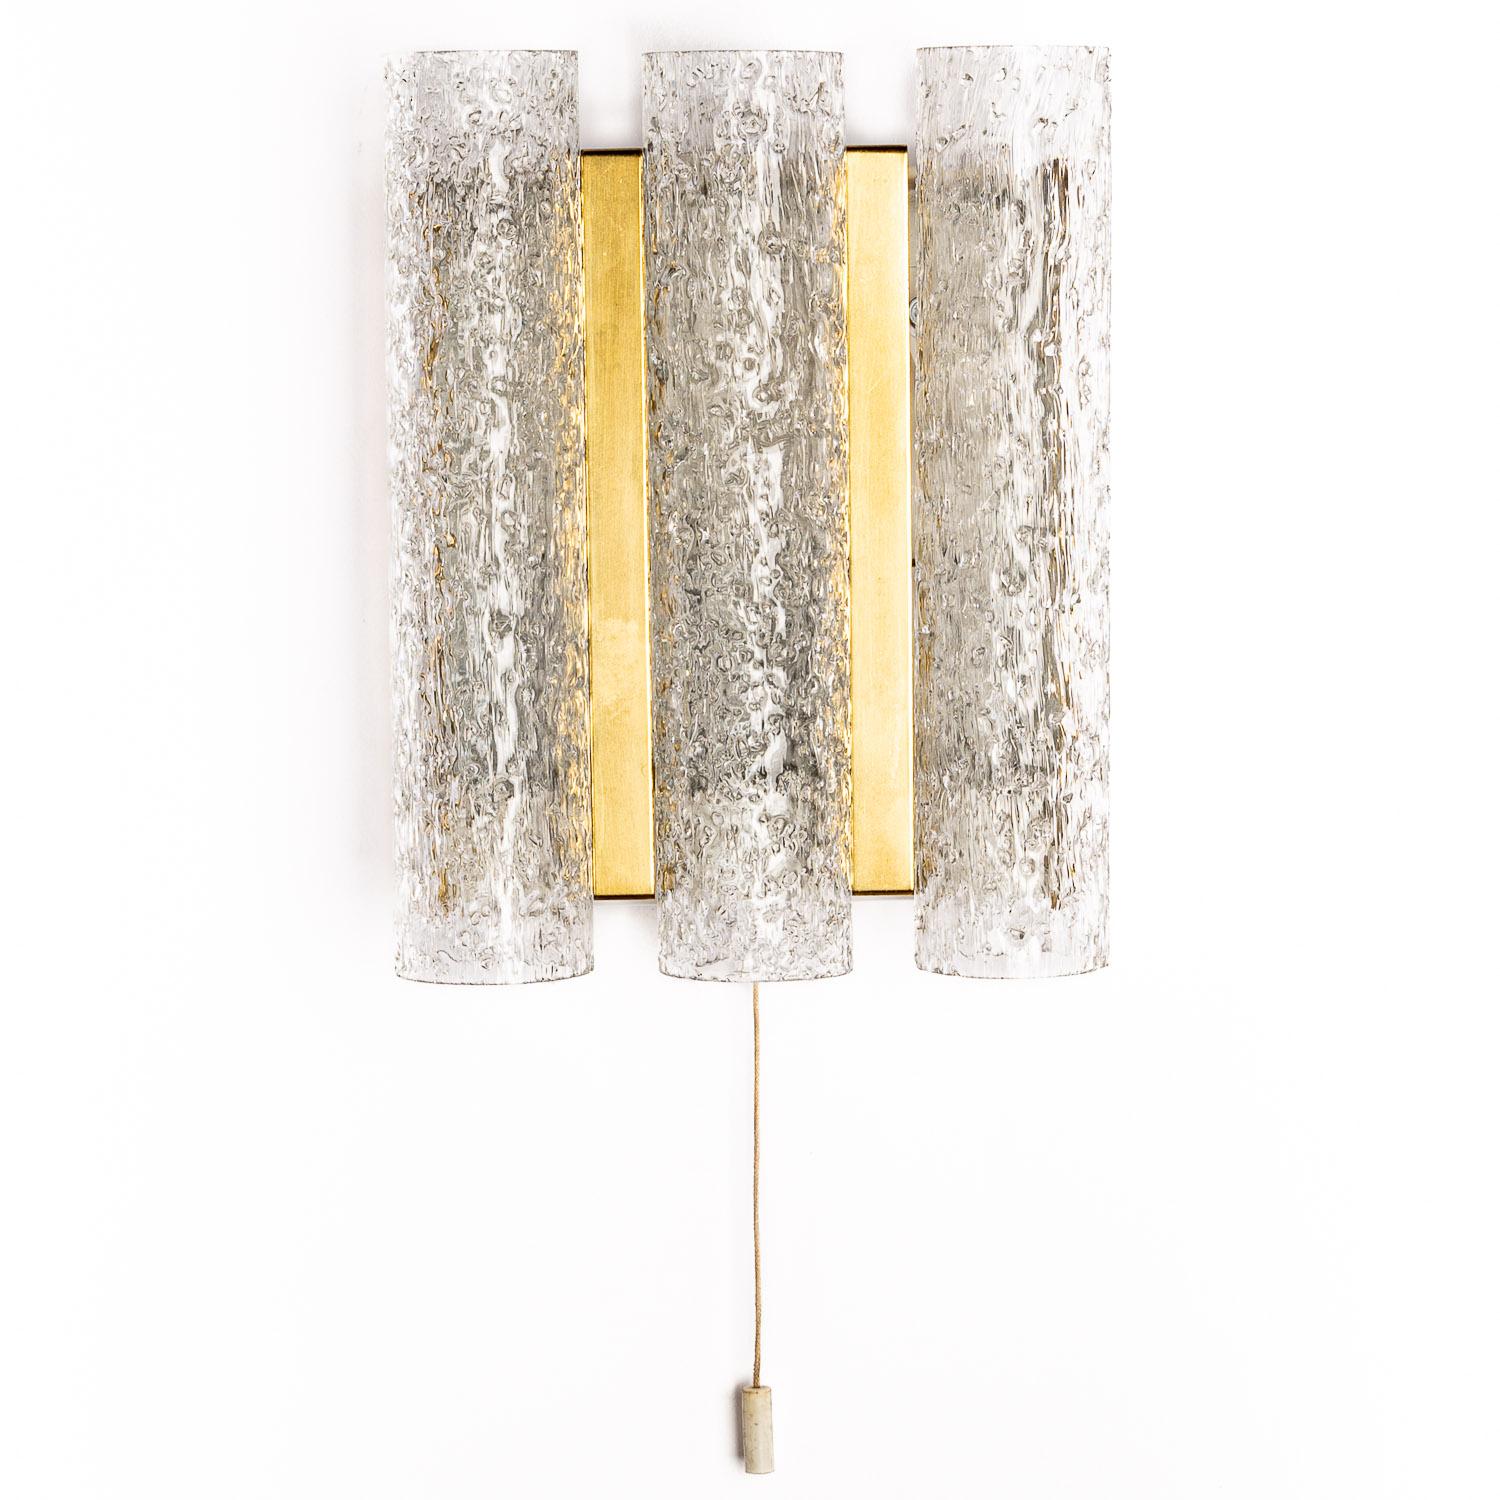 If you like vintage lighting then you will love this Doria glass sconces. Designed with three vertical tubes astride brass plates and metal centre, it's a highly distinctive piece and looks stunning when illuminated. Authenticity is guaranteed with